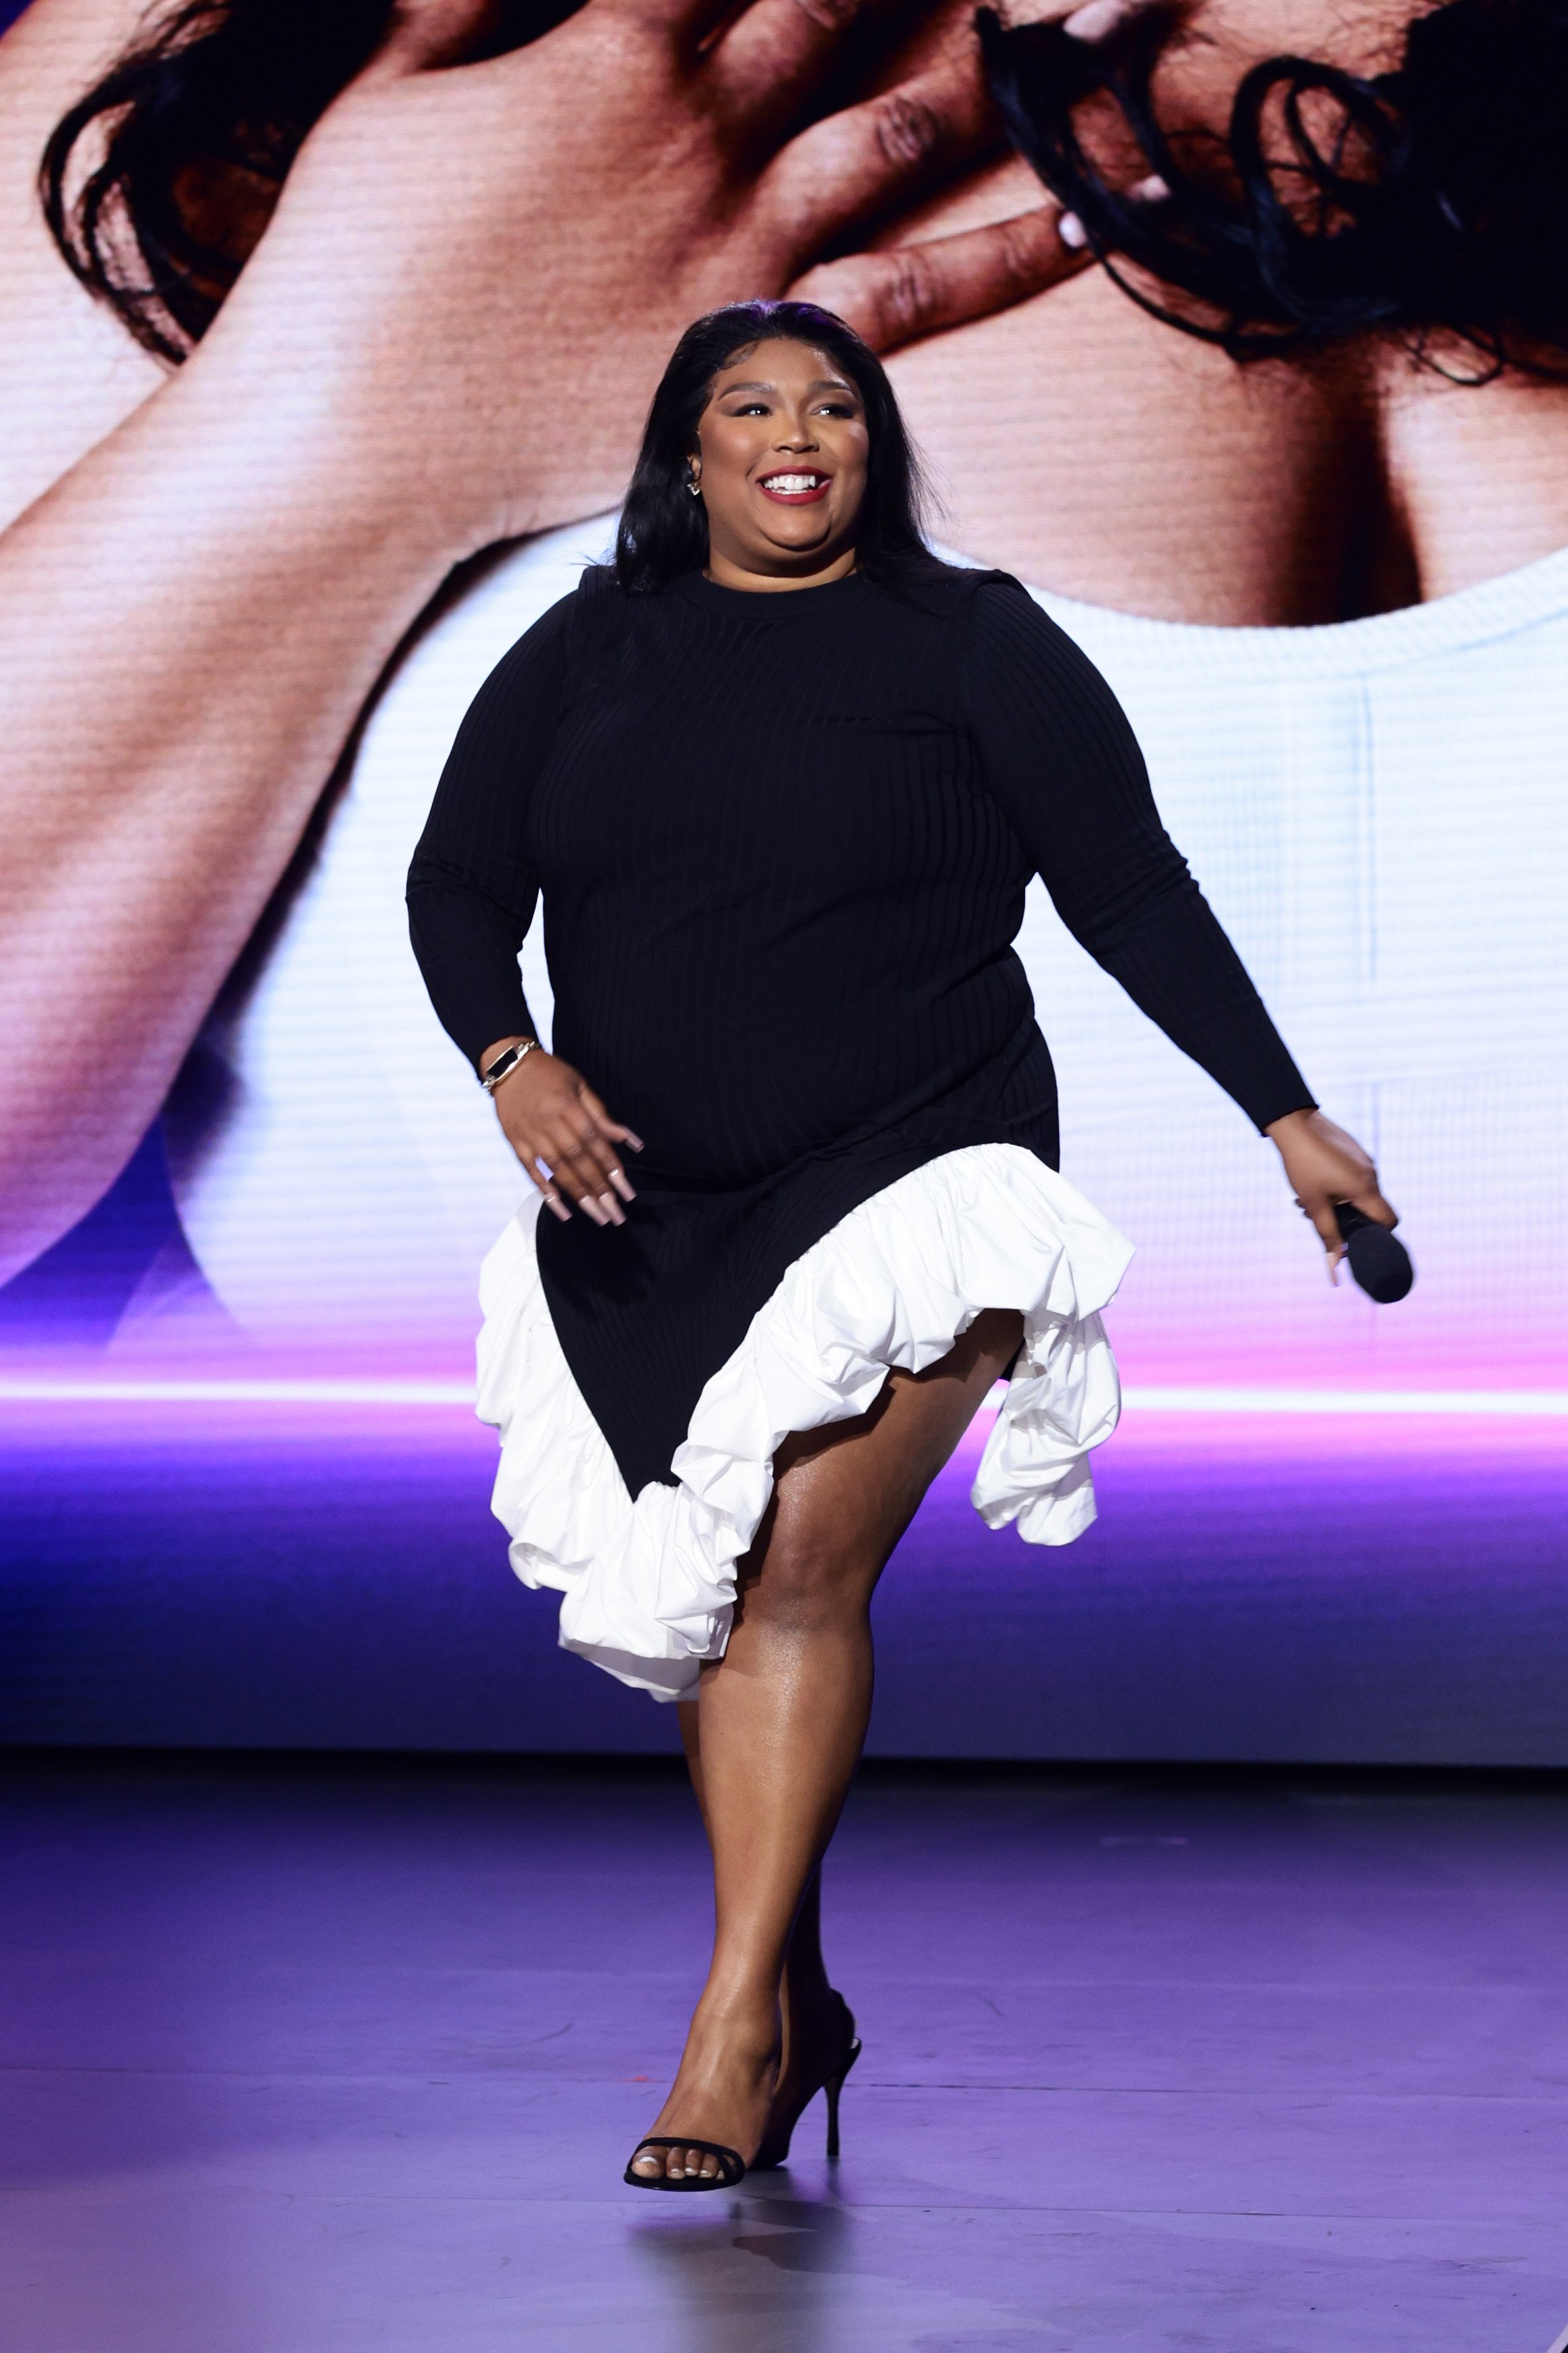 Lizzo at the Warner Bros. Discovery Upfront 2022 show on May 18, 2022 | Source: Getty Images